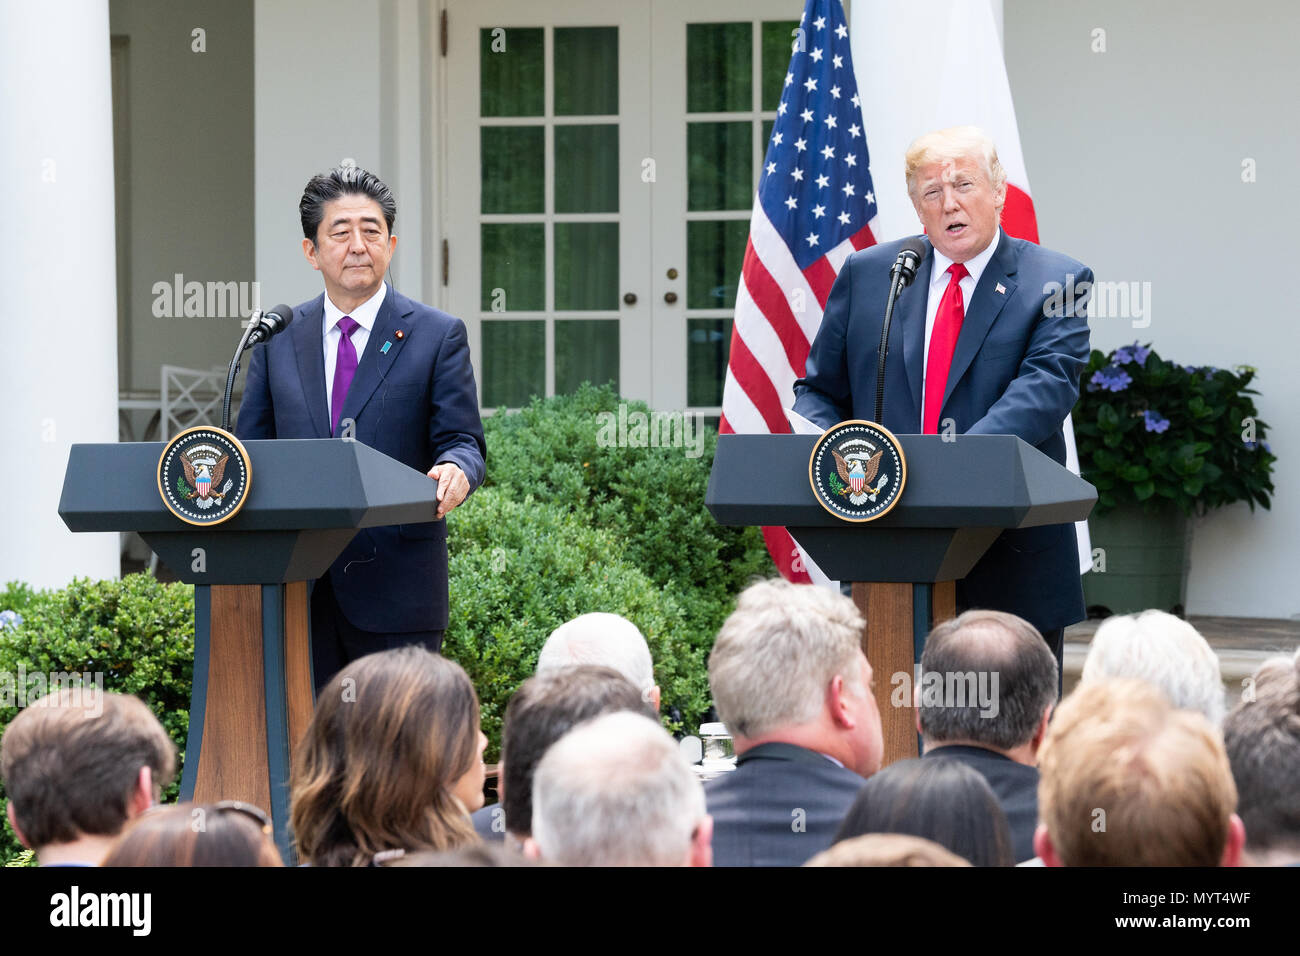 President Donald Trump and Shinzo Abe, the Prime Minister of Japan, in the Rose Garden at the White House. US President Donald Trump and Japan's Prime Minister Shinzo Abe take part in a joint press conference in the Rose Garden of the White House. Stock Photo